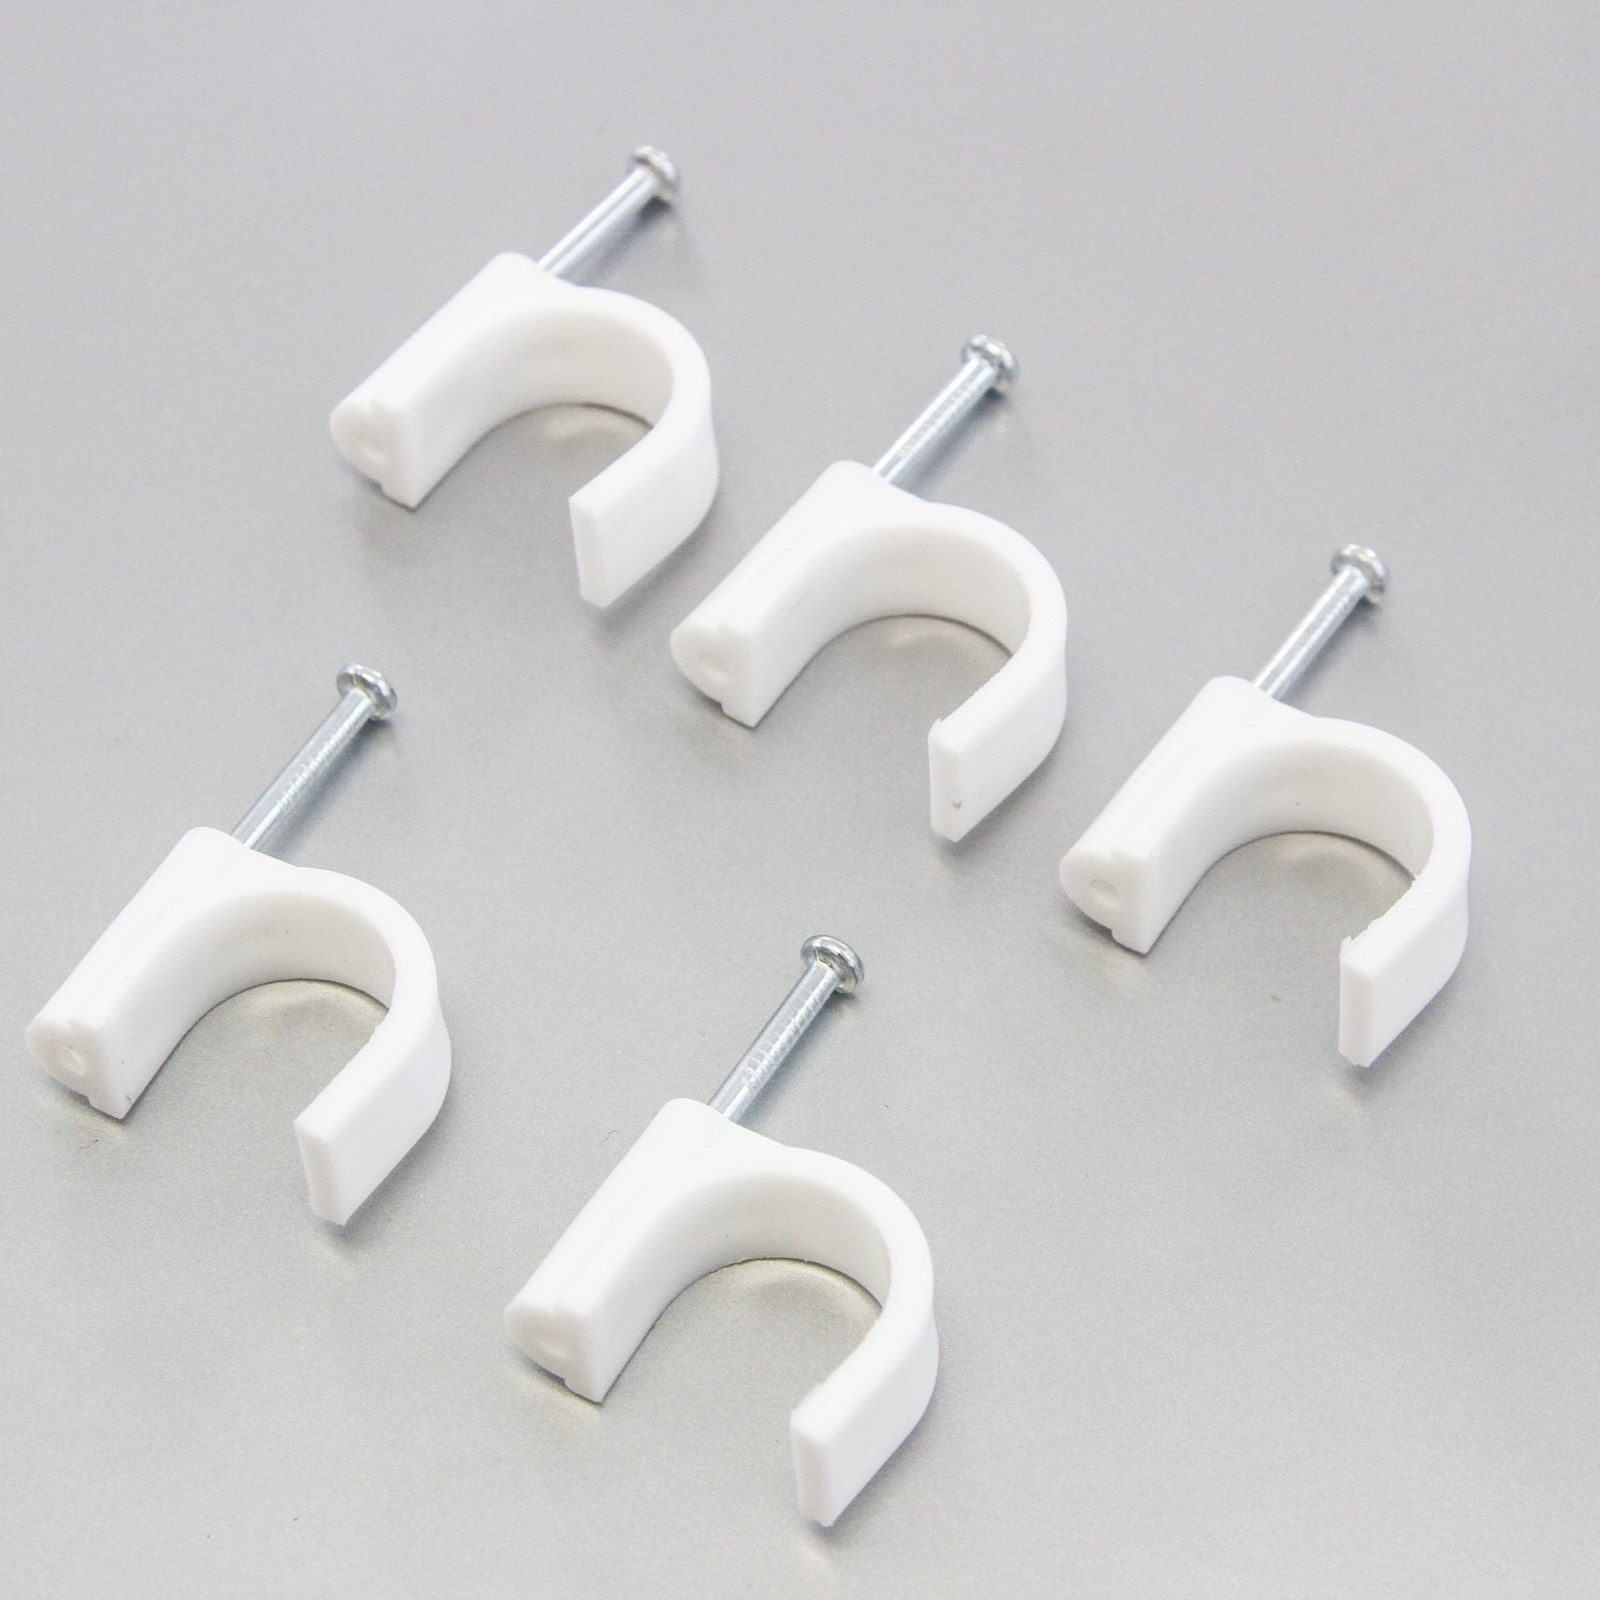 Nail clamp for flat cable 5x3 mm Cable clip pack of 50 units white -  Cablematic